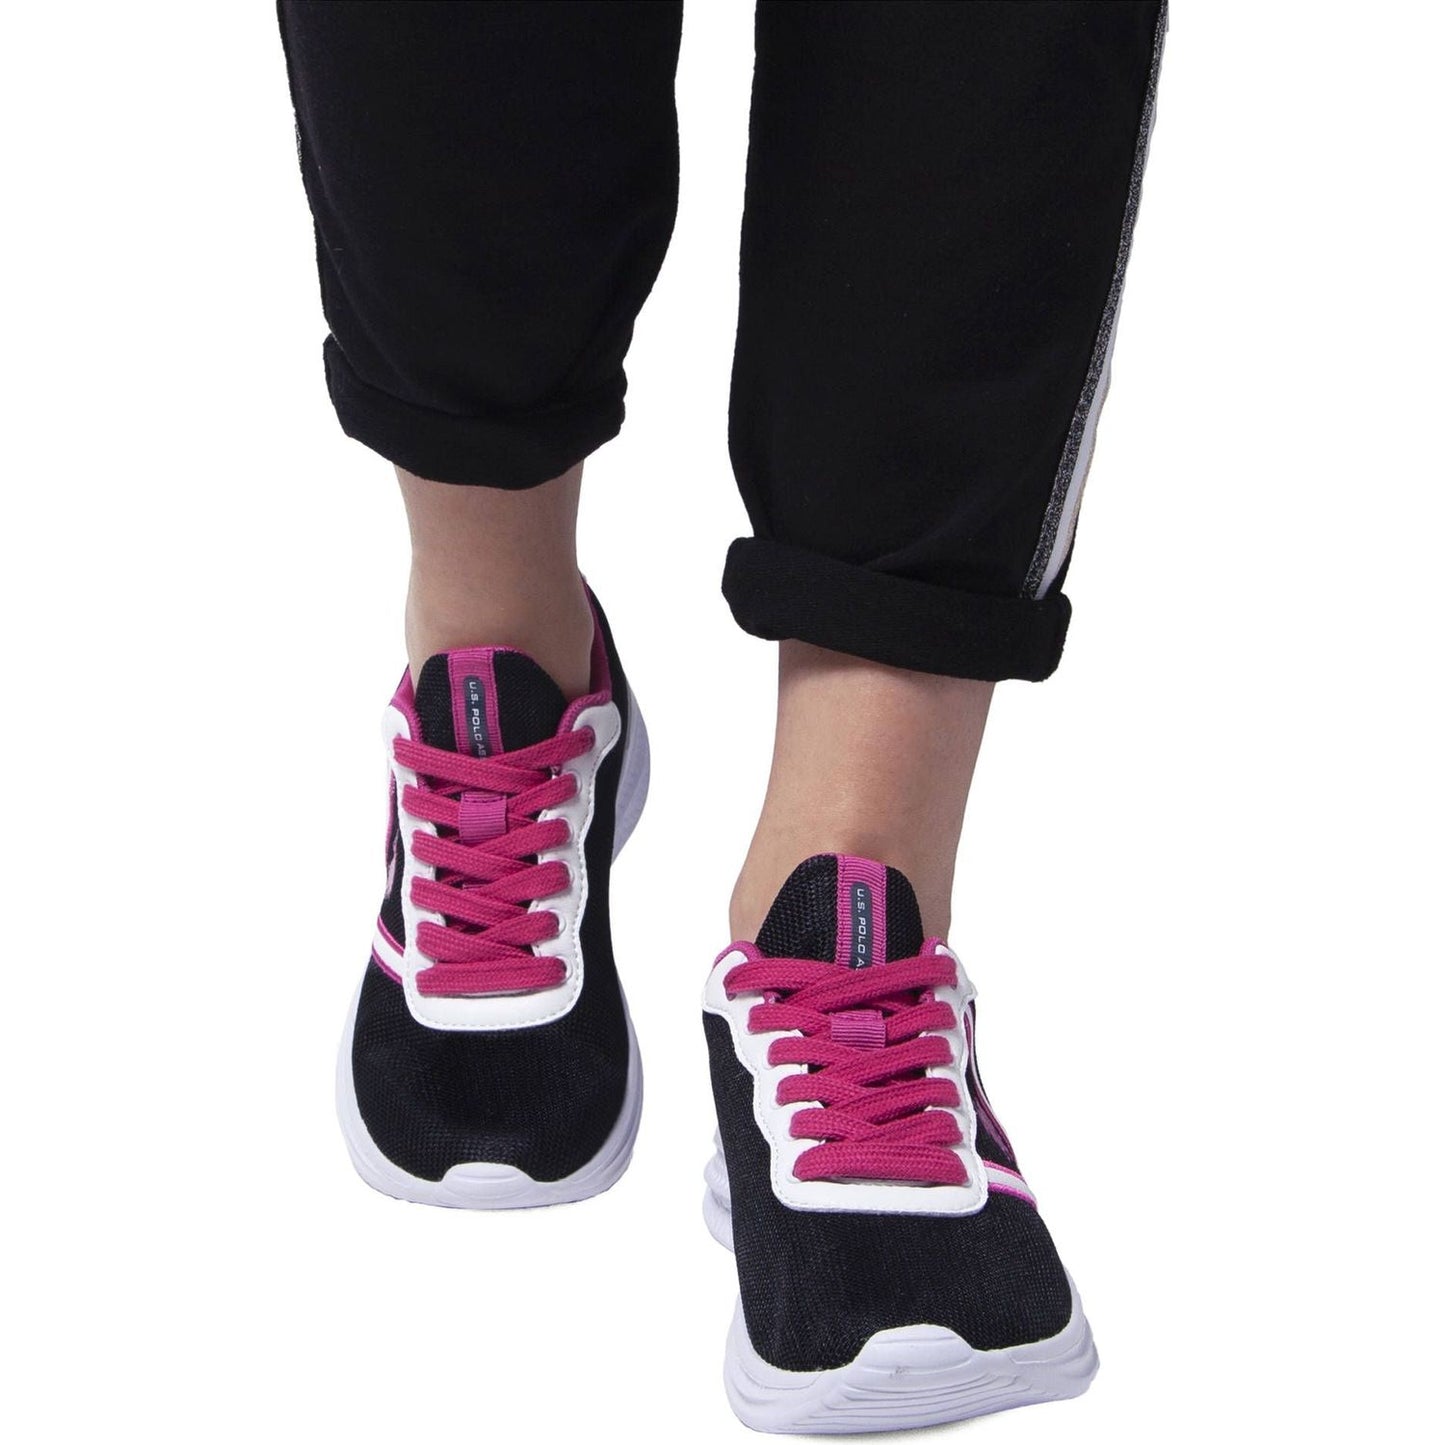 Chic Black Lace-Up Sports Sneakers